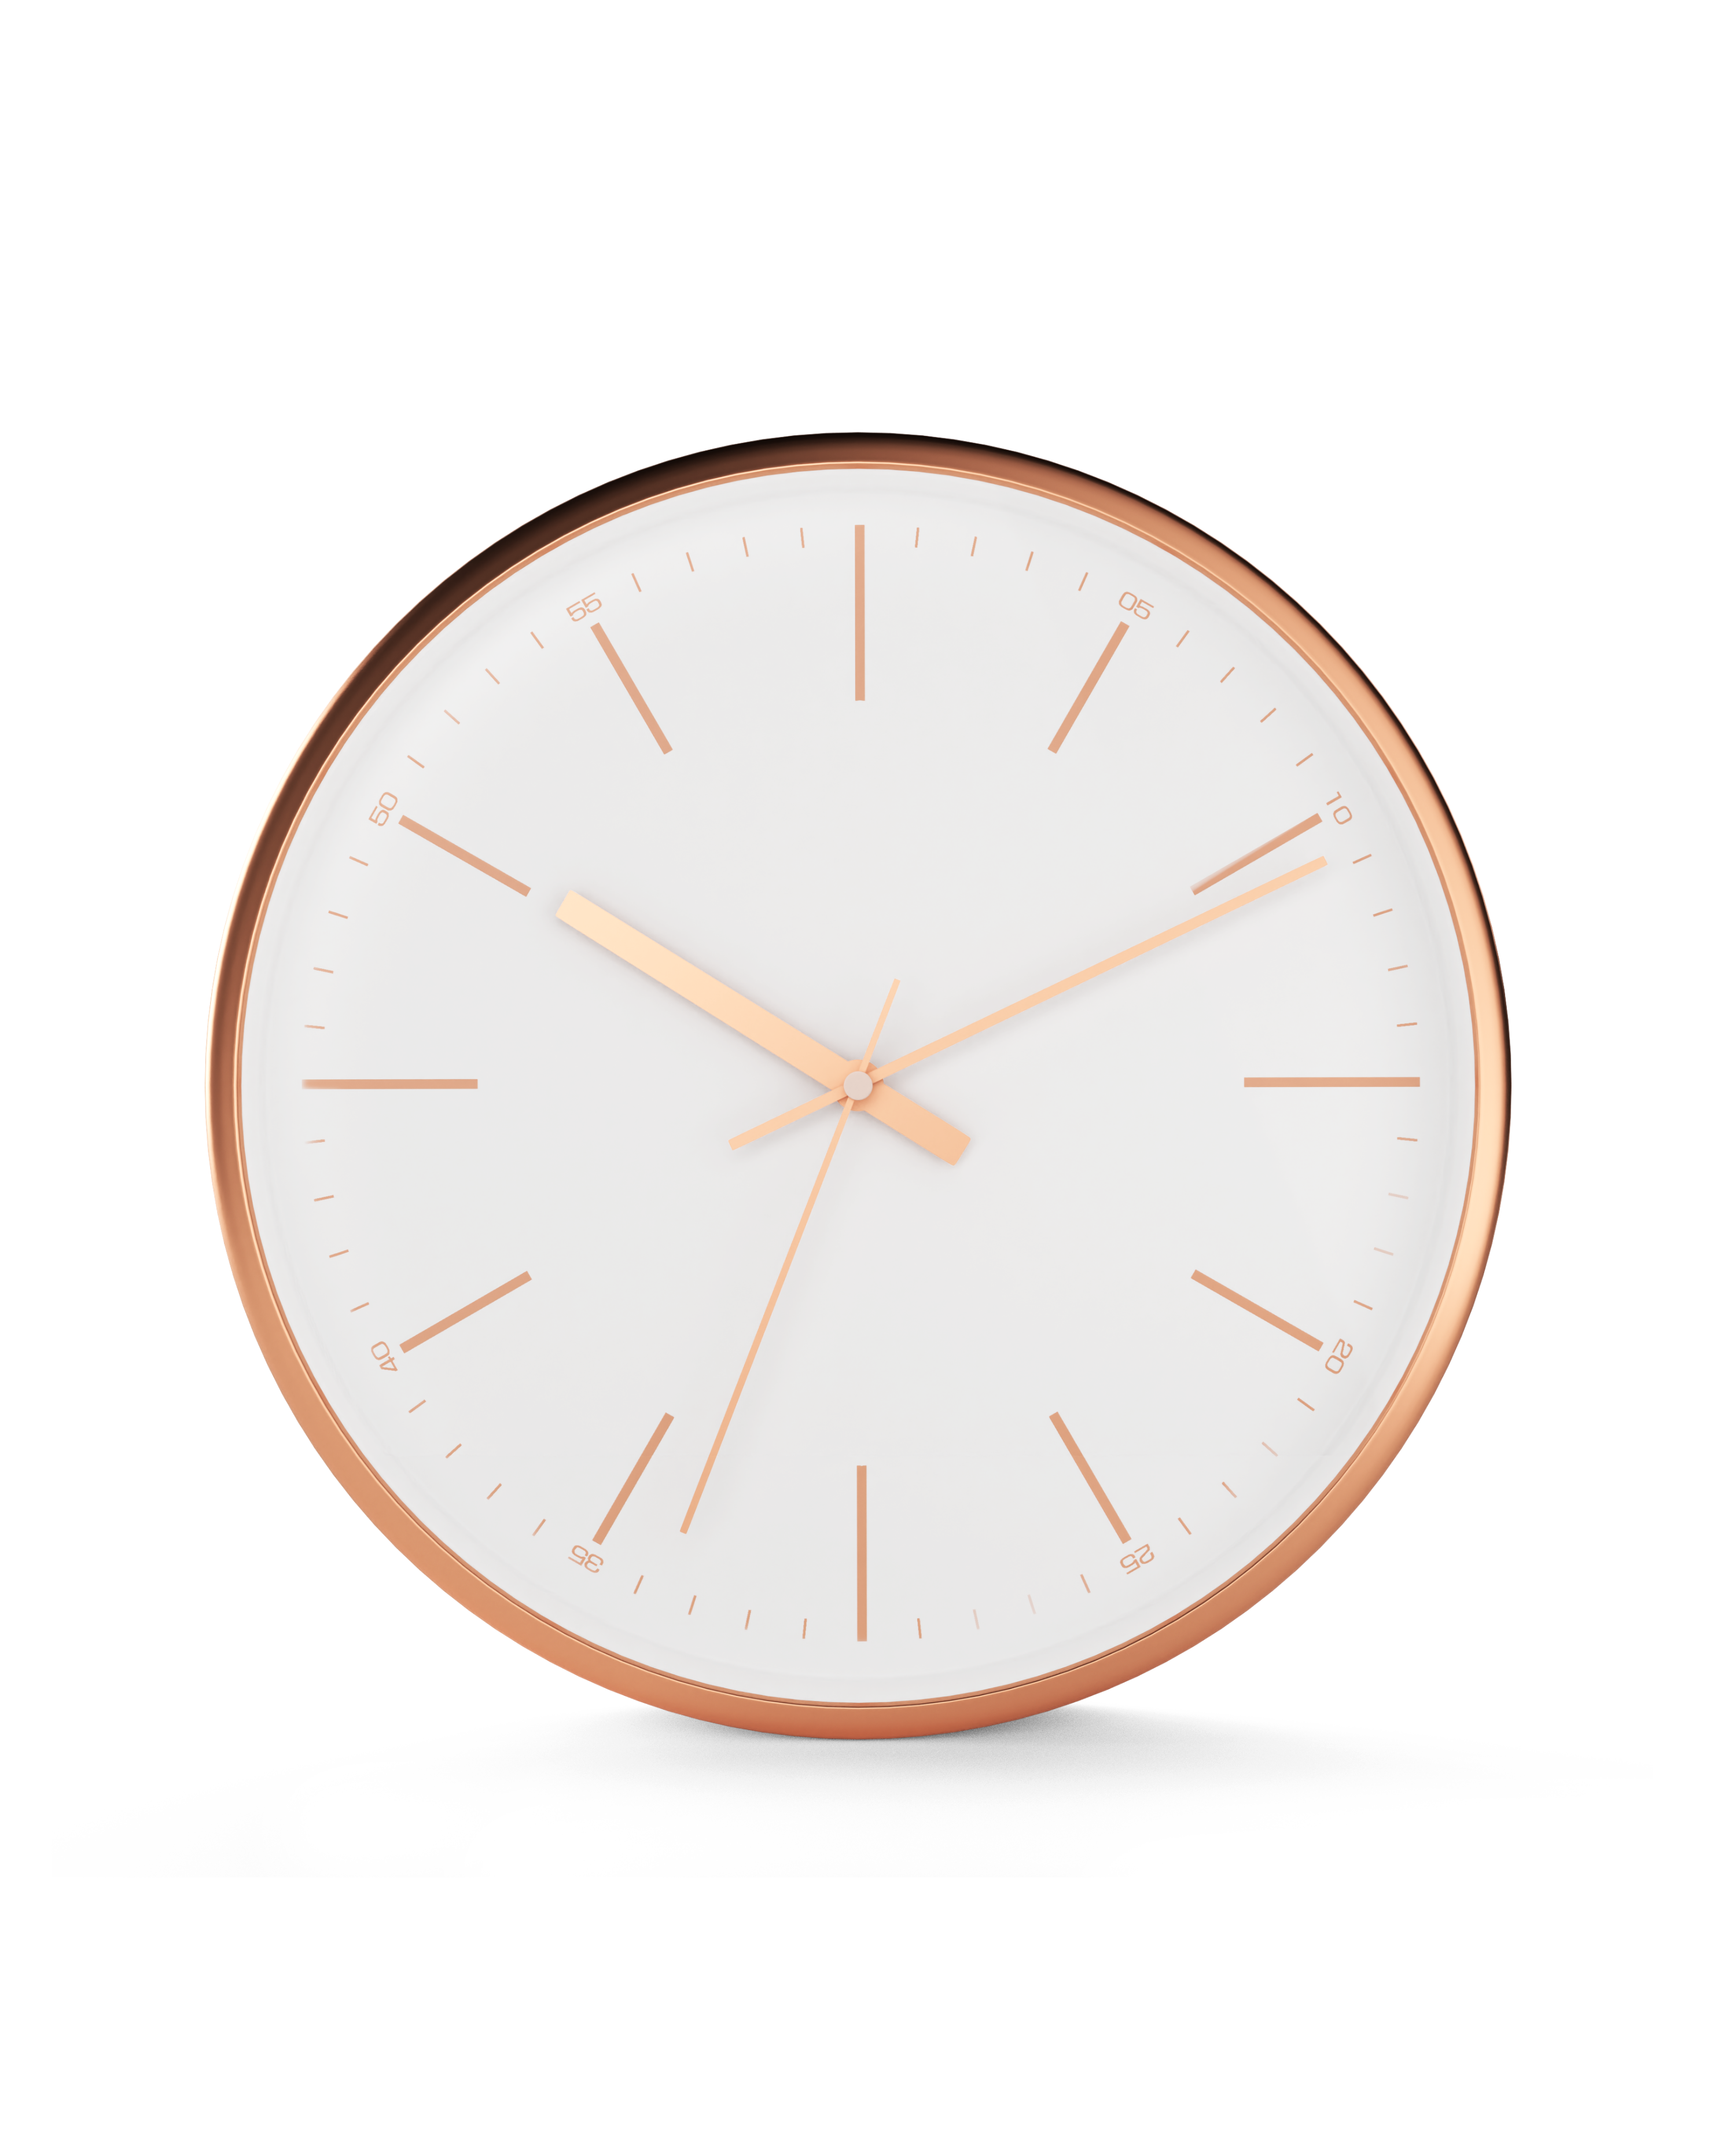 Driini Modern Mid Century Desk & Shelf Clock (Black Rose Gold) - Battery  Operated with Silent, Analog Movement – Small Tabletop Clocks for Office –